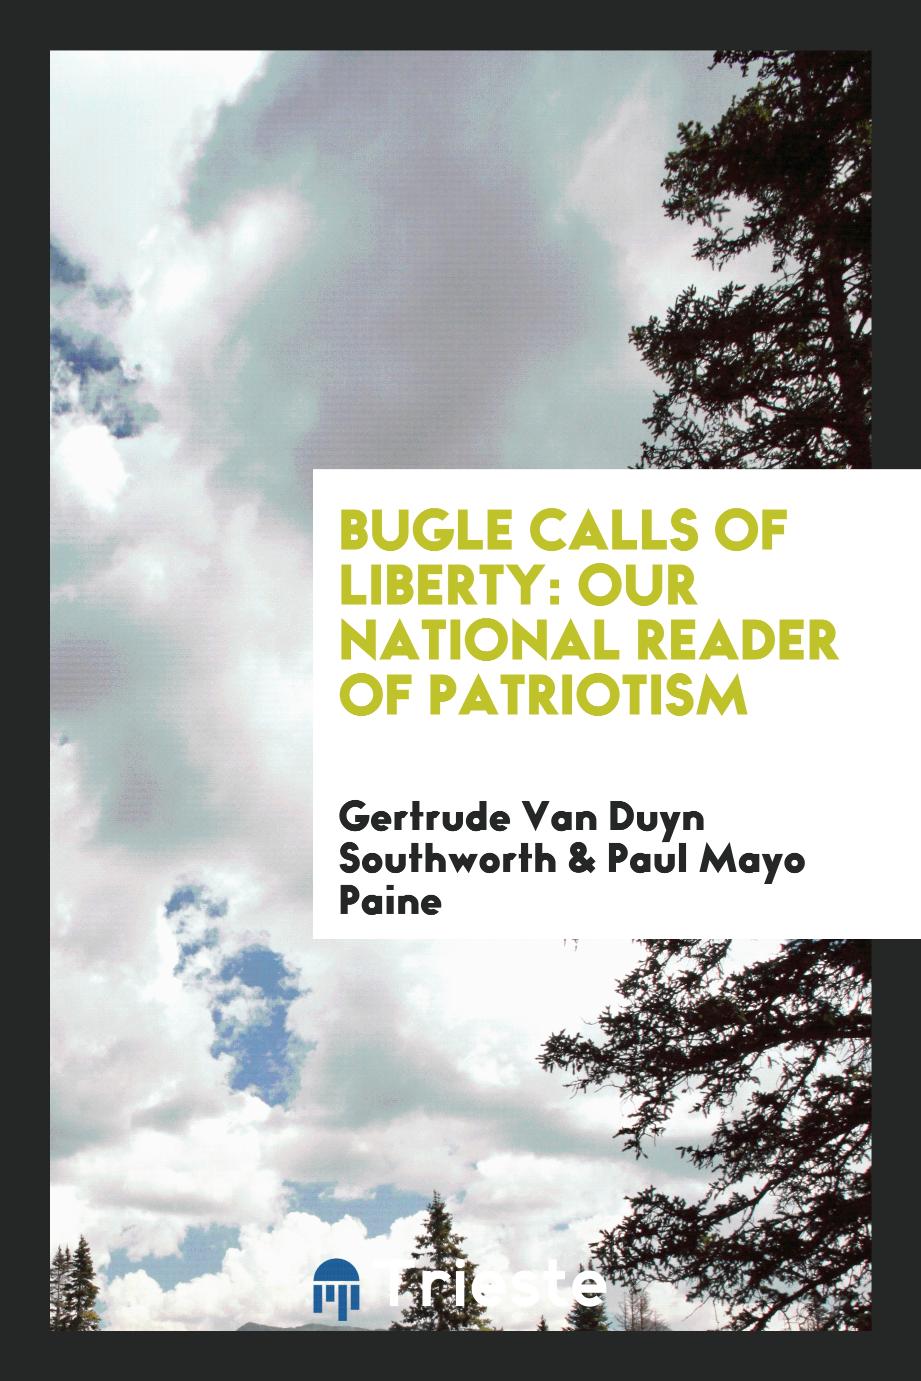 Bugle Calls of Liberty: Our National Reader of Patriotism